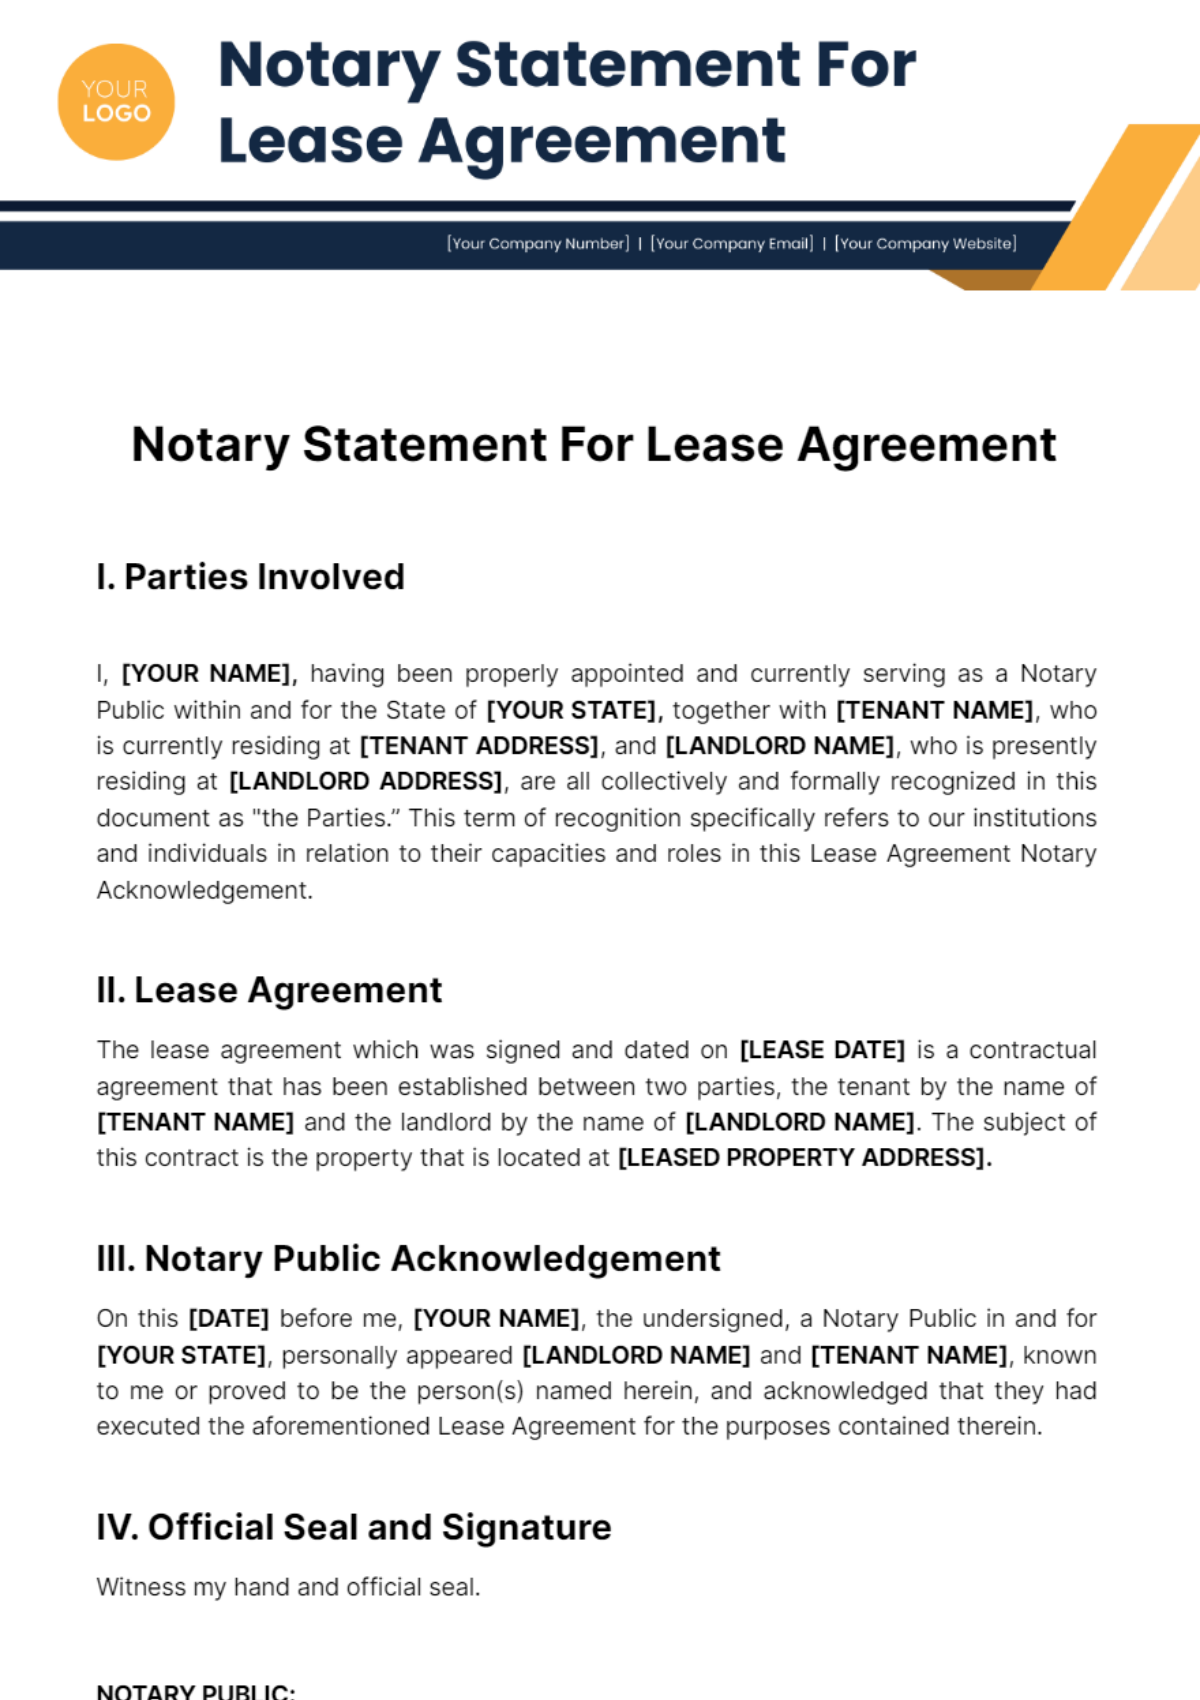 Notary Statement For Lease Agreement Template